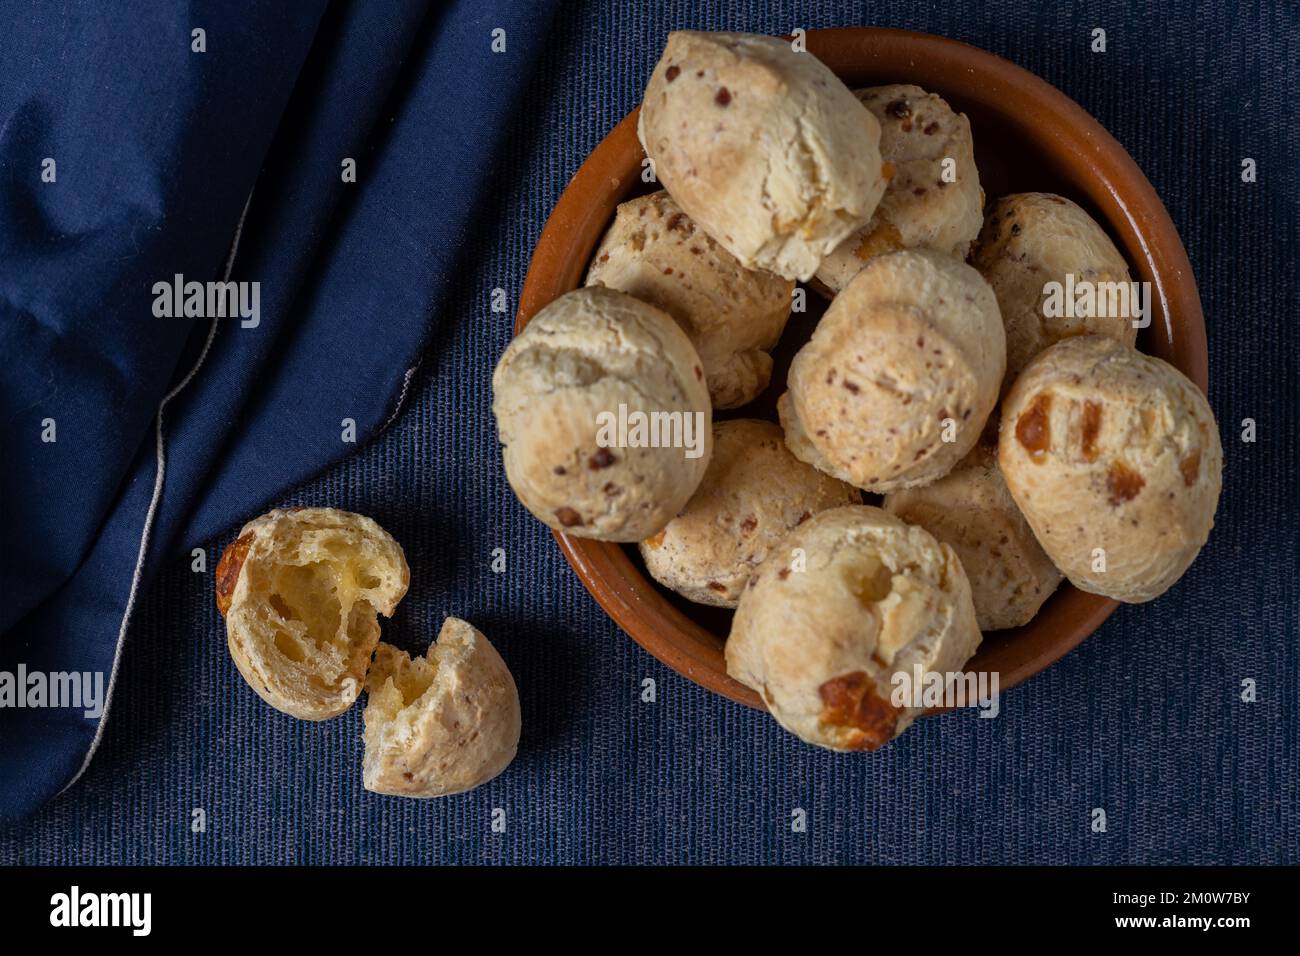 Top view of chipa, typical Paraguayan cheese bread, open to the middle. Stock Photo